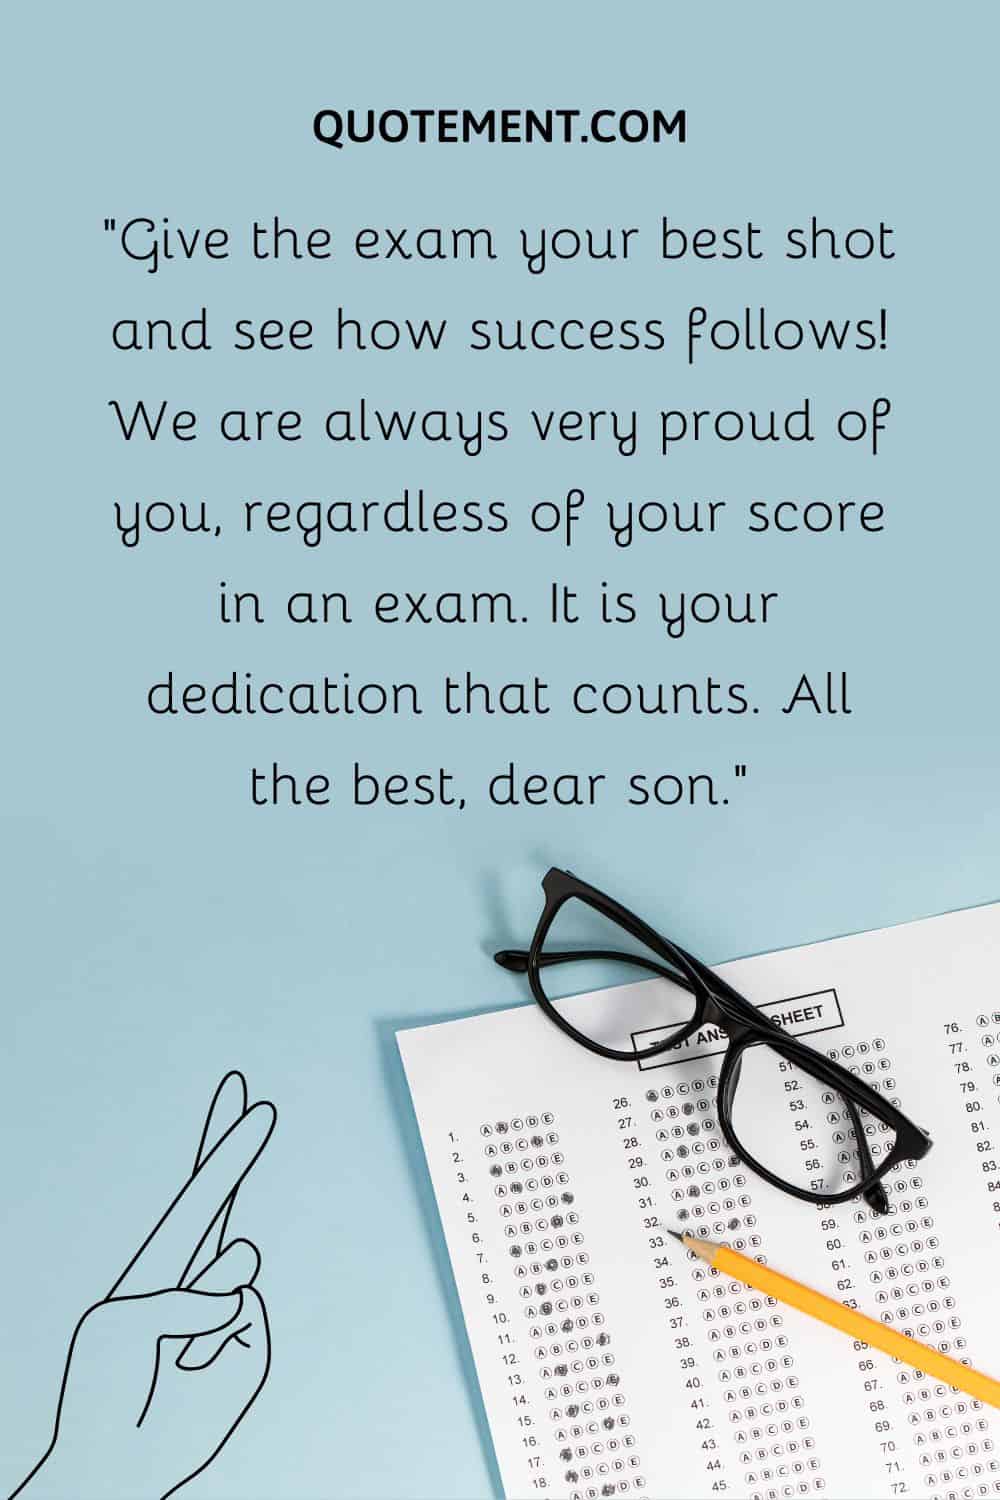 Give the exam your best shot and see how success follows